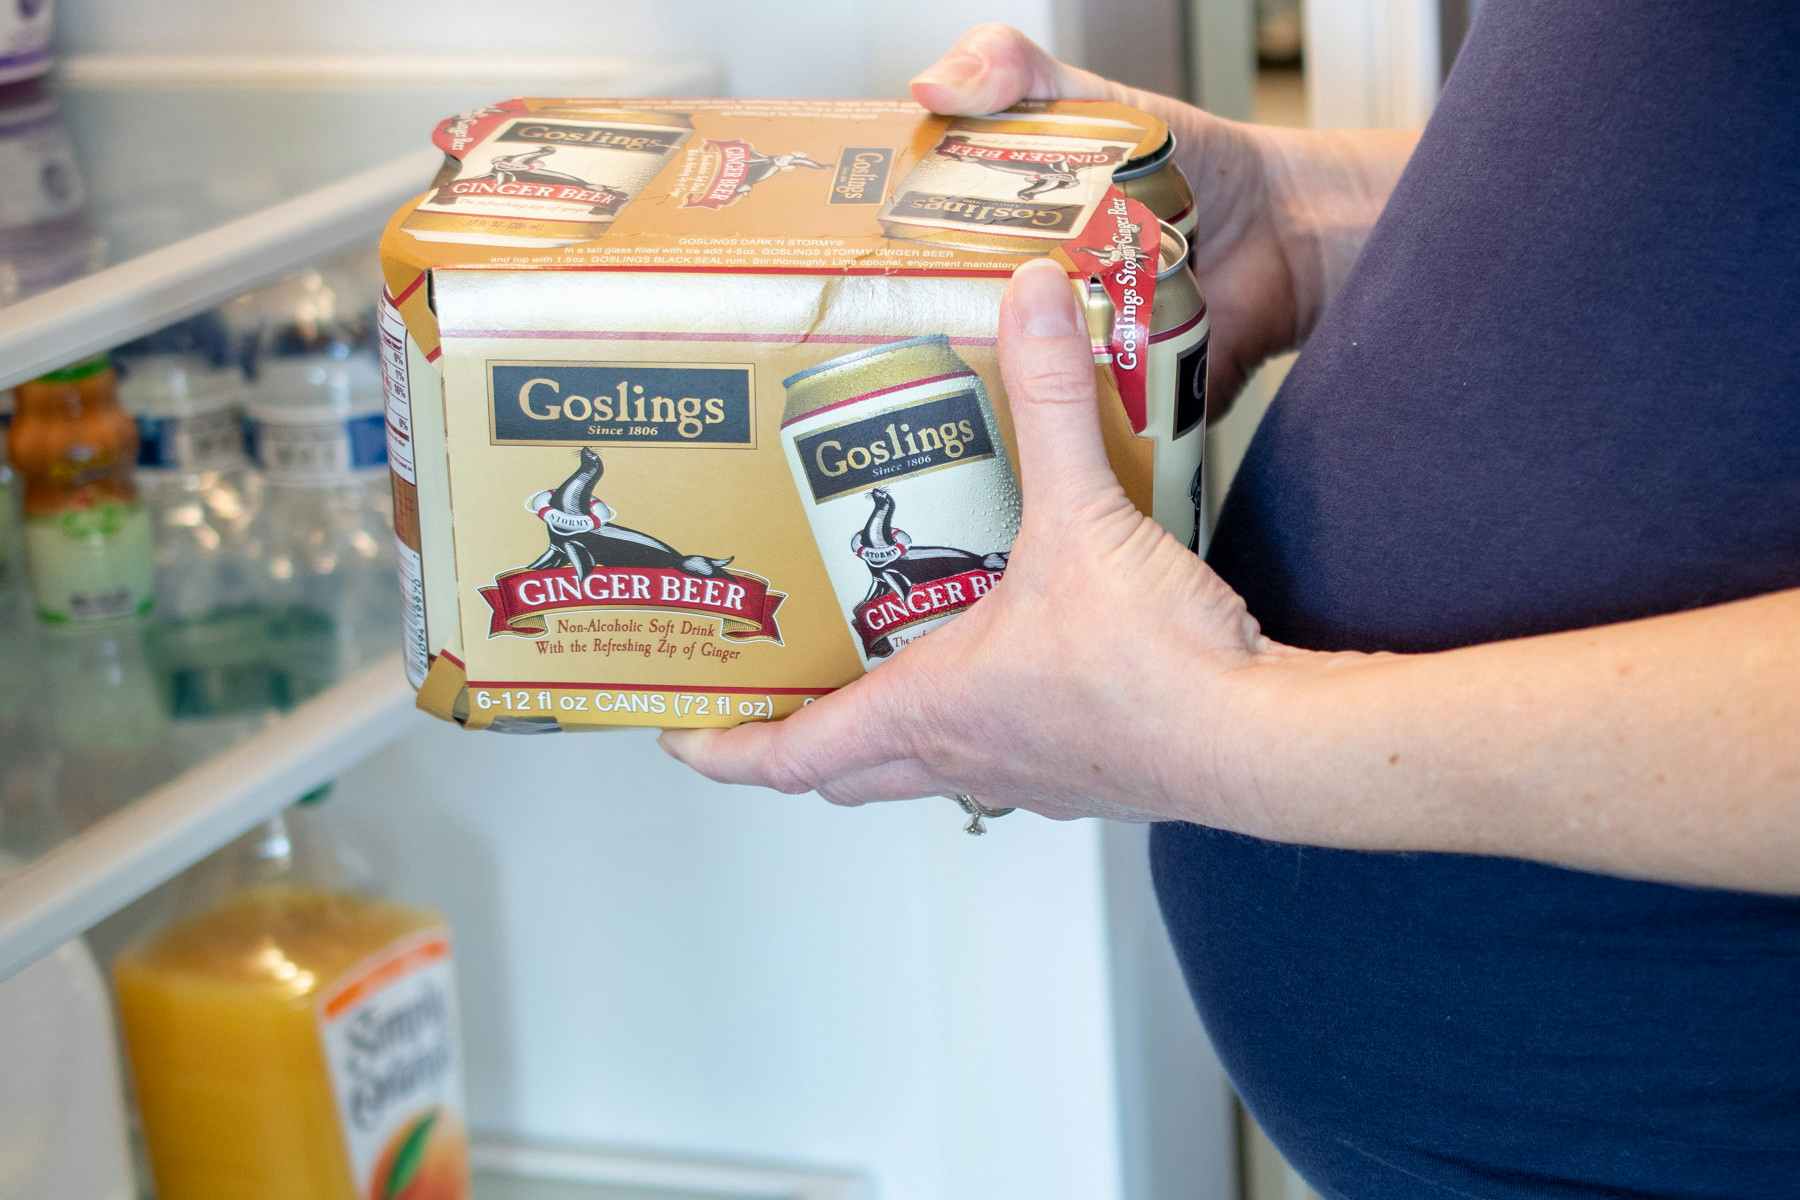 A pregnant woman holding a carton of ginger beer in front of an open refrigerator.